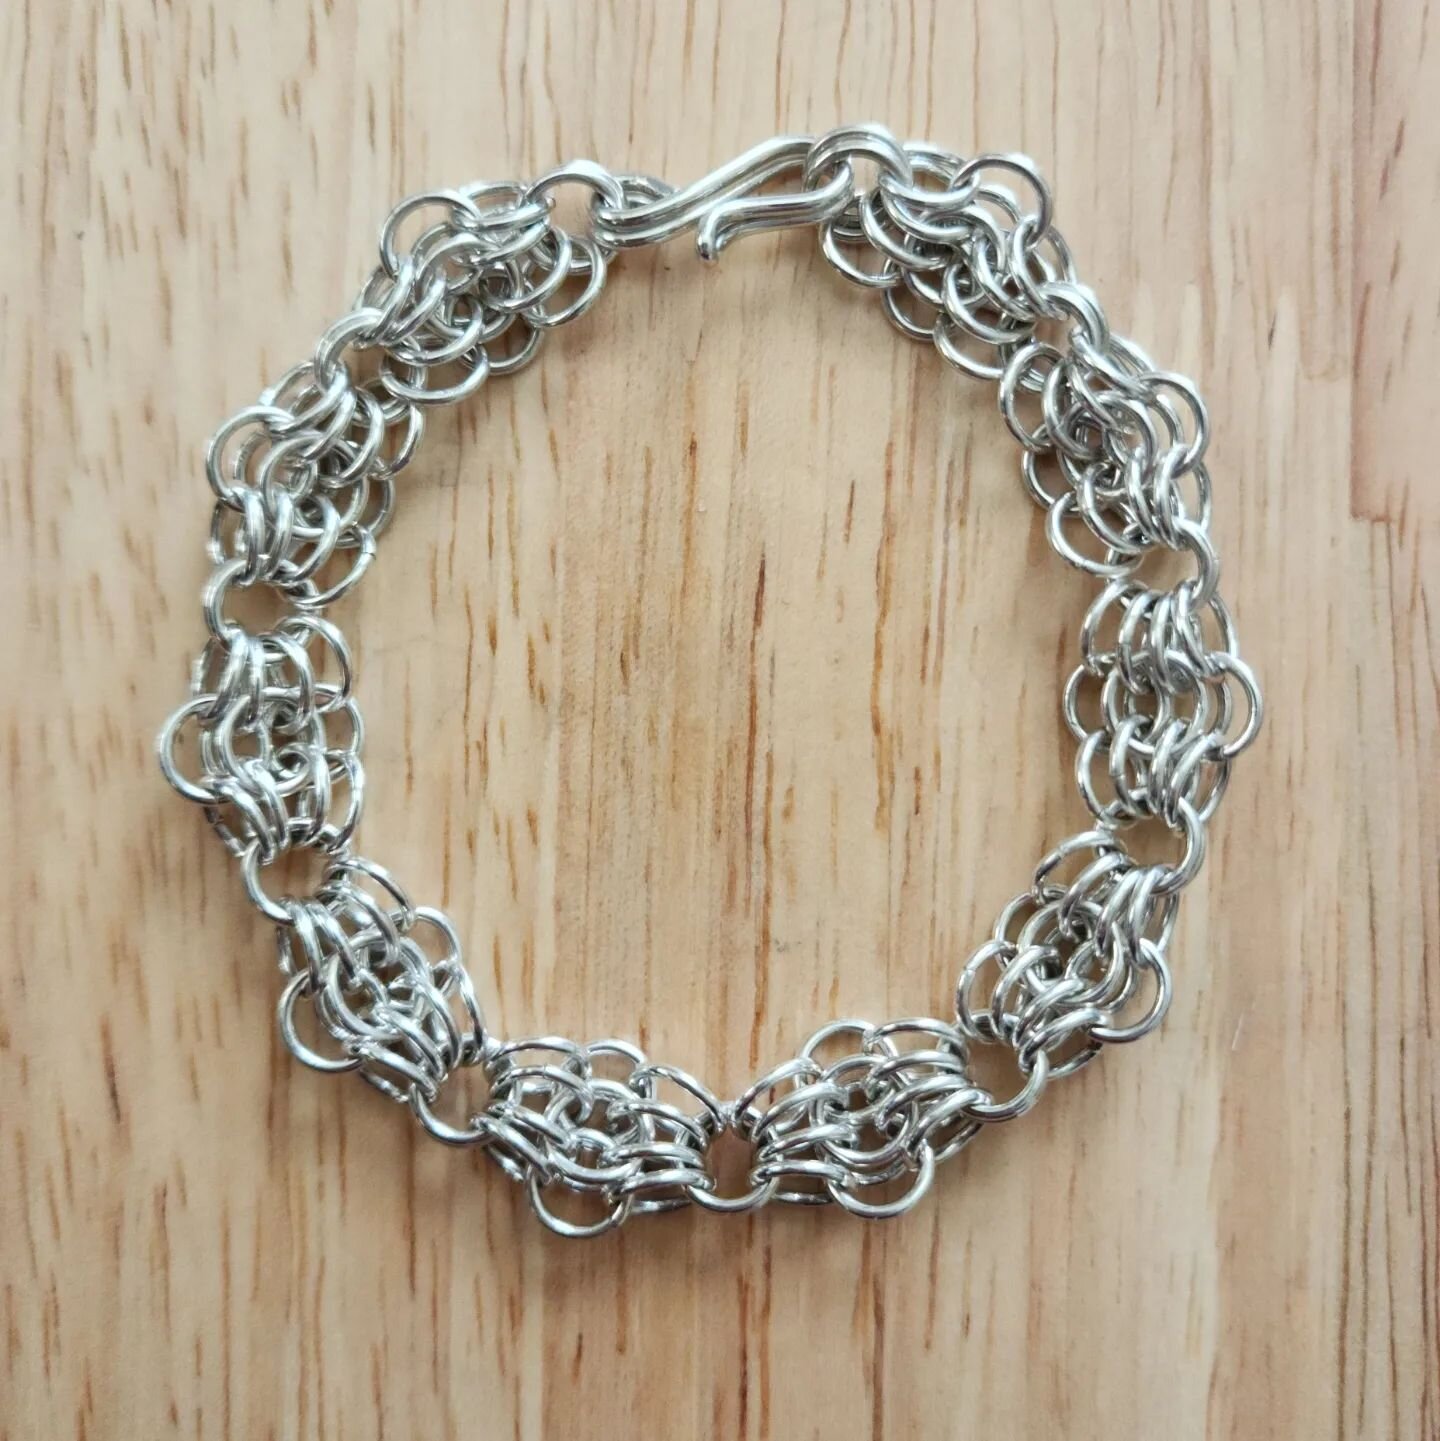 This is a beautiful statement piece that is silky on your wrist and good for fidgeting. This is a butterfly weave chain mail bracelet with a hook and eye clasp. The links are 18 gauge sterling silver and the clasp is made from 16 gauge sterling silve